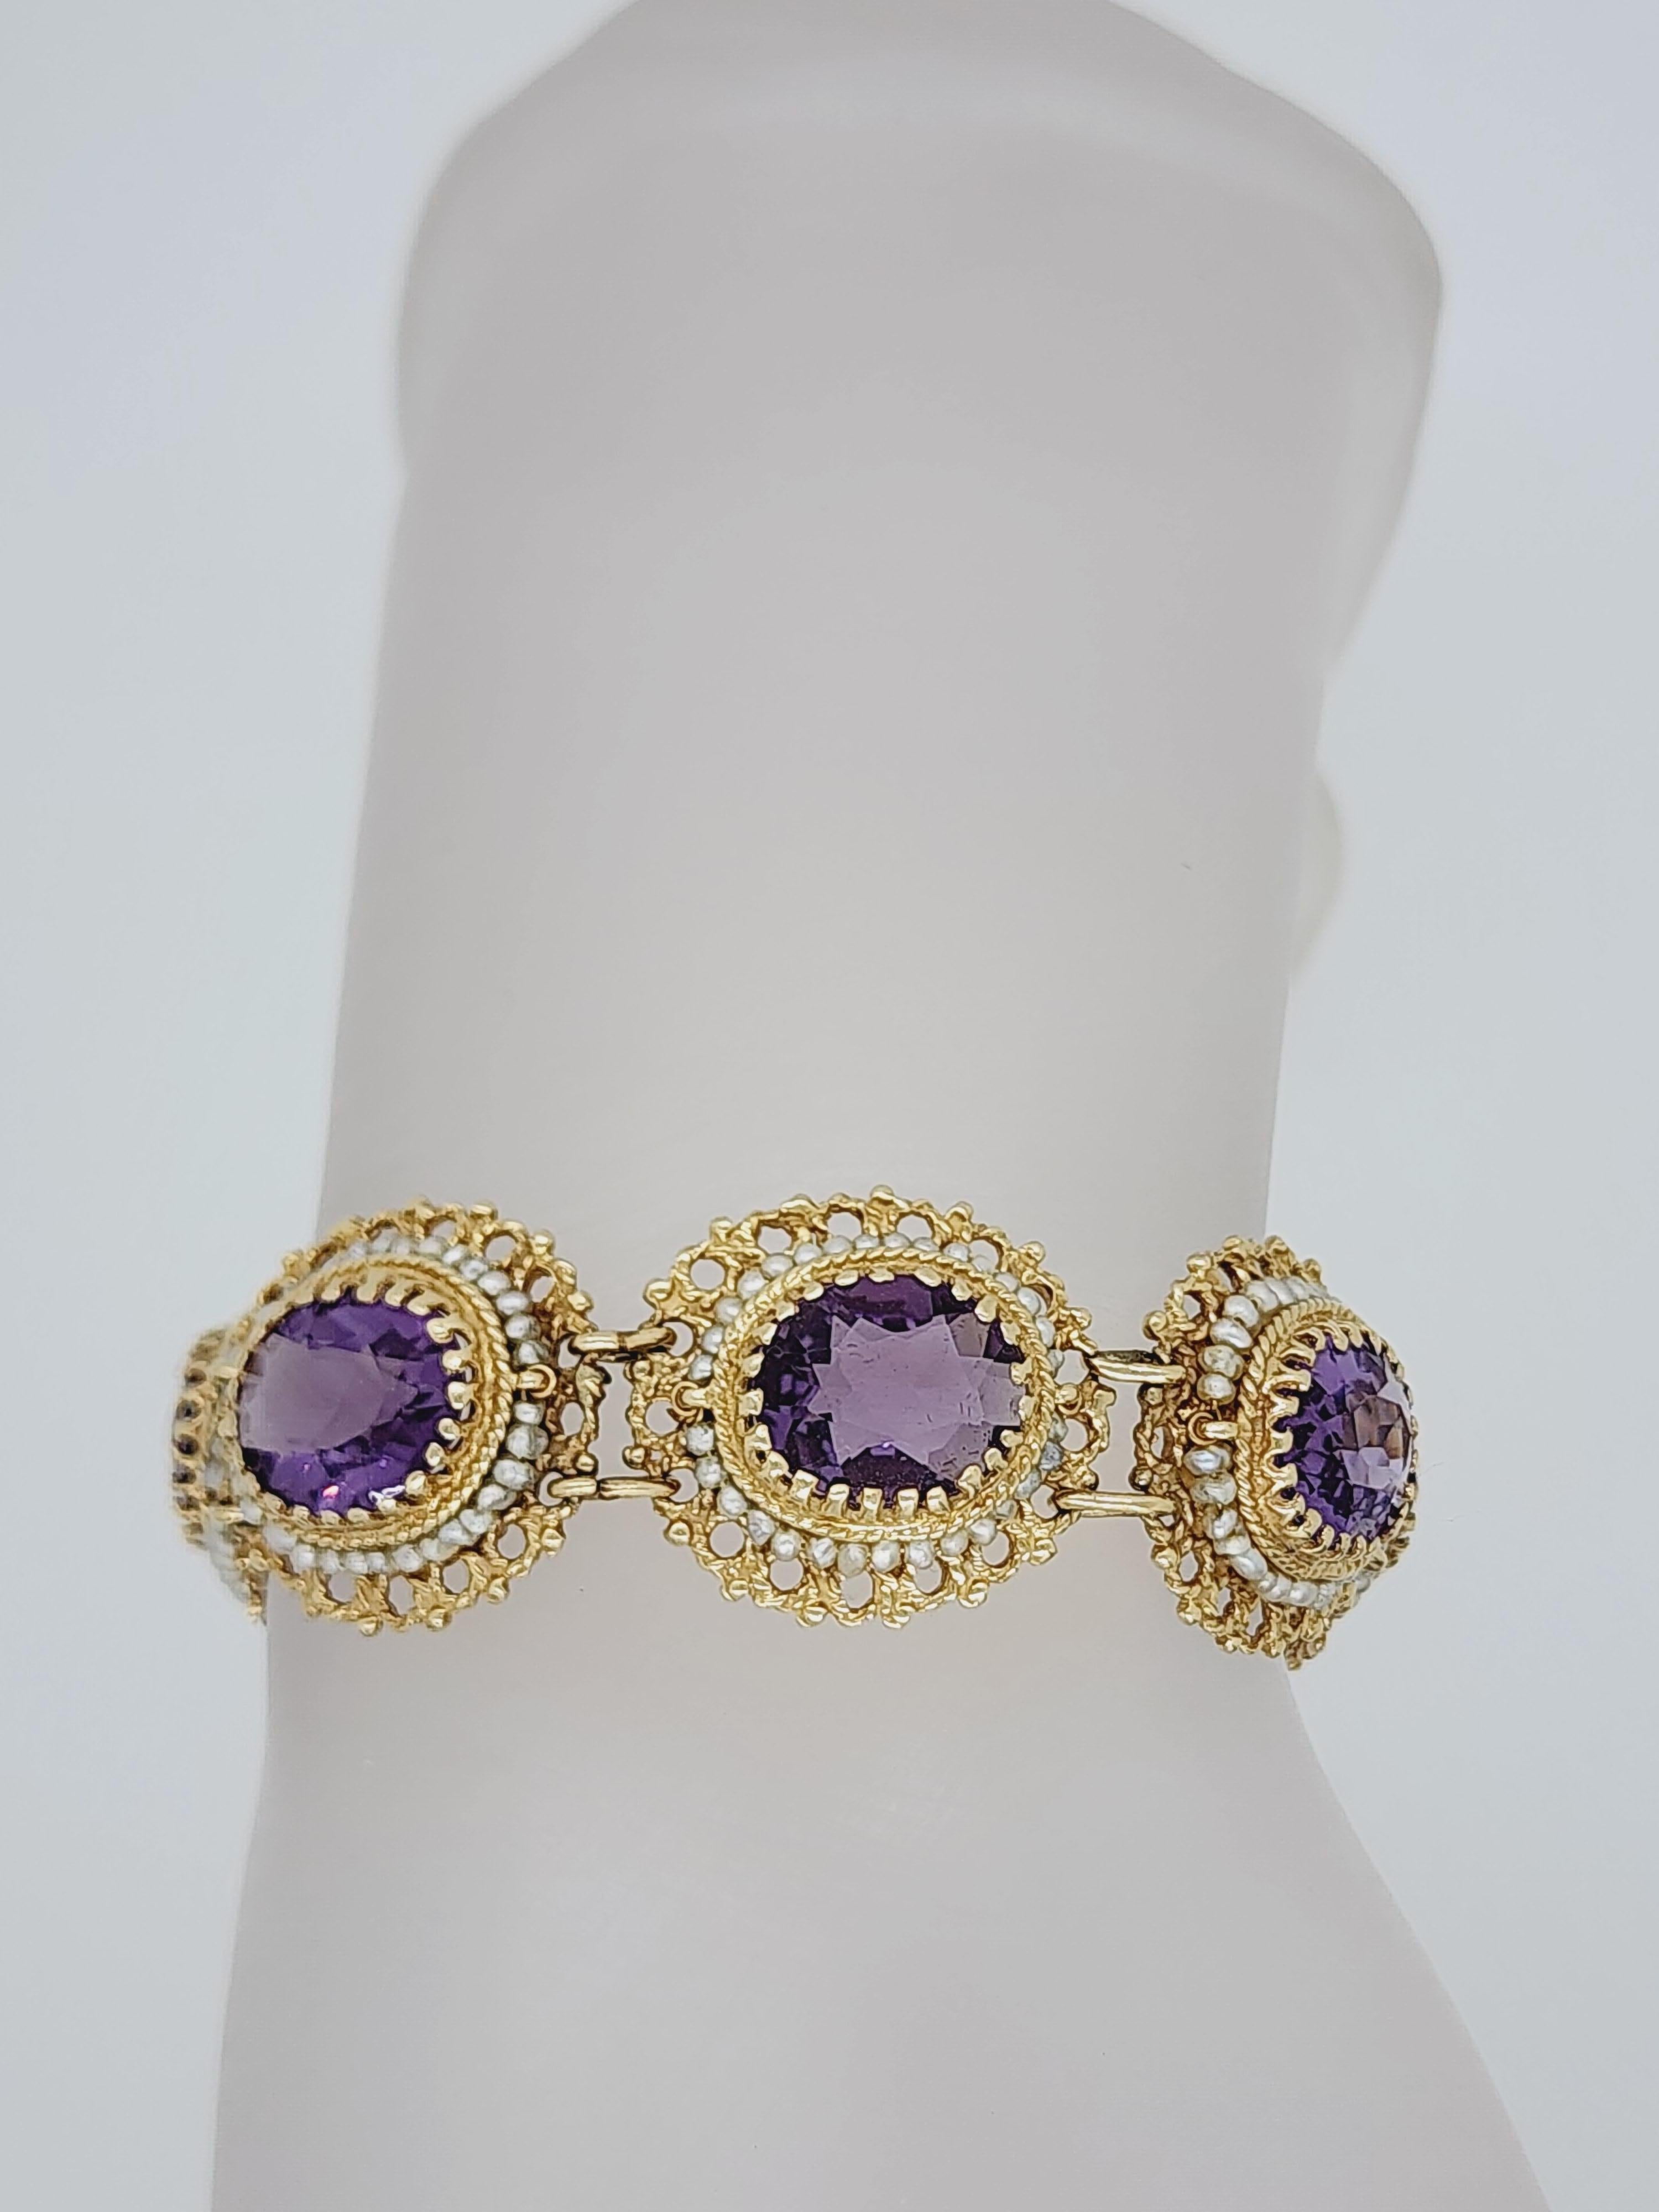 Beautiful 8 amethyst ovals and white pearls in a handmade in 14k yellow gold mounting.  Length is 7